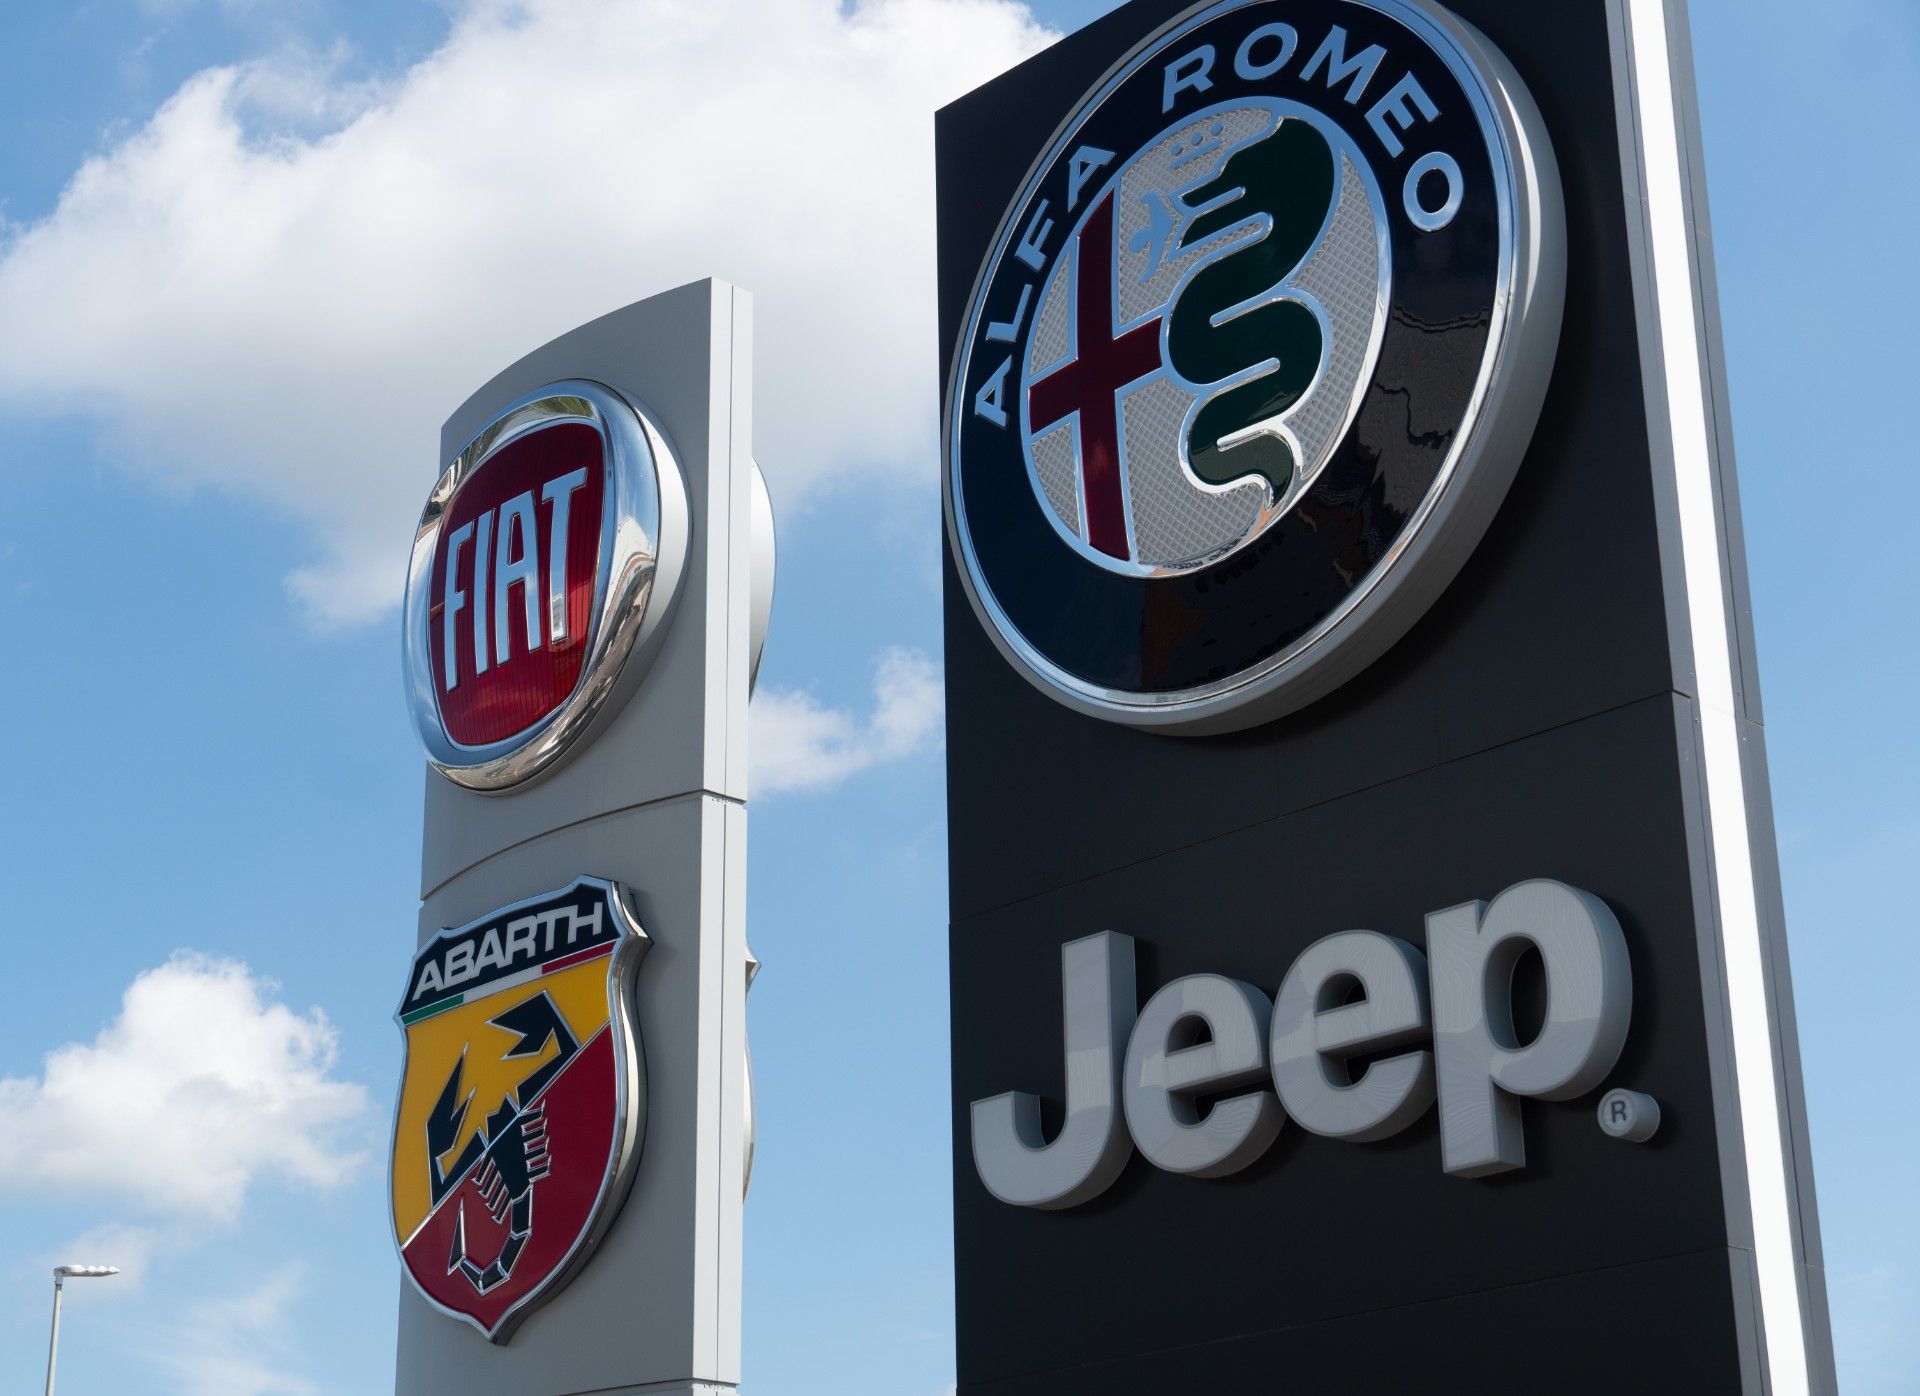 Fiat, Alfa Romeo, Jeep and Abarth logos on signs outside dealership - Fiat emissions